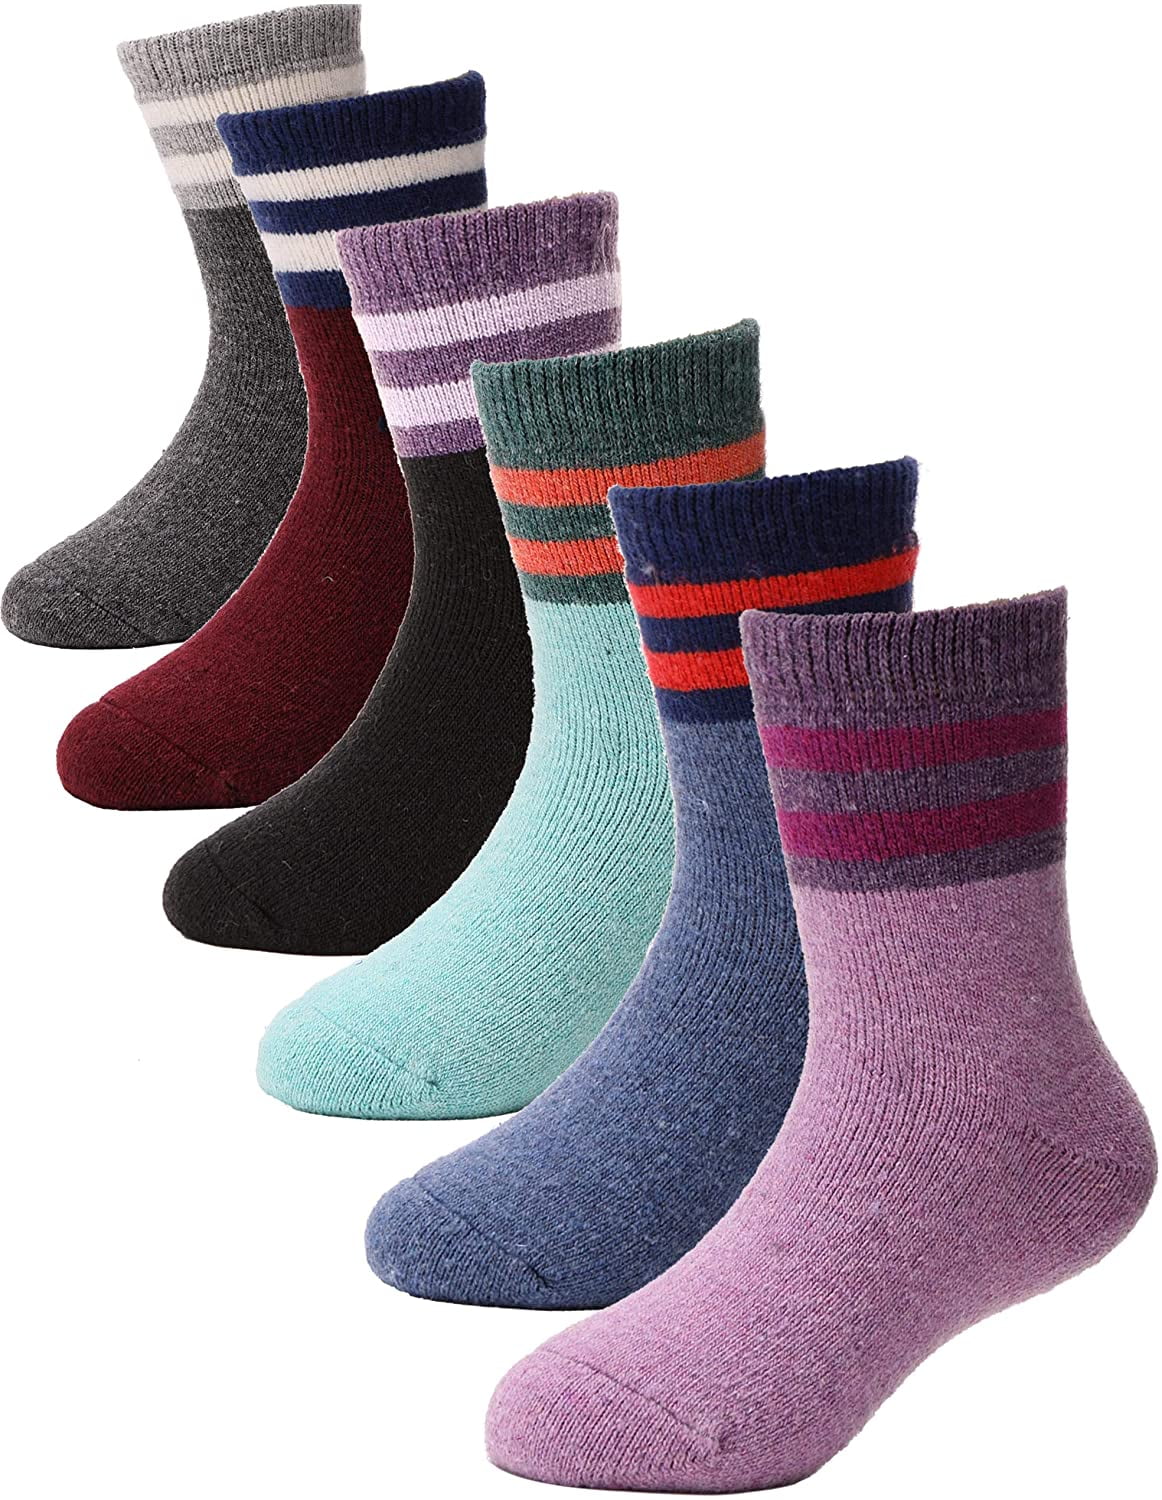 Kids Wool Socks 6 Pairs Toddlers Boys Girls Child Warm Winter Thermal Thick Boot Cabin Snow Socks 